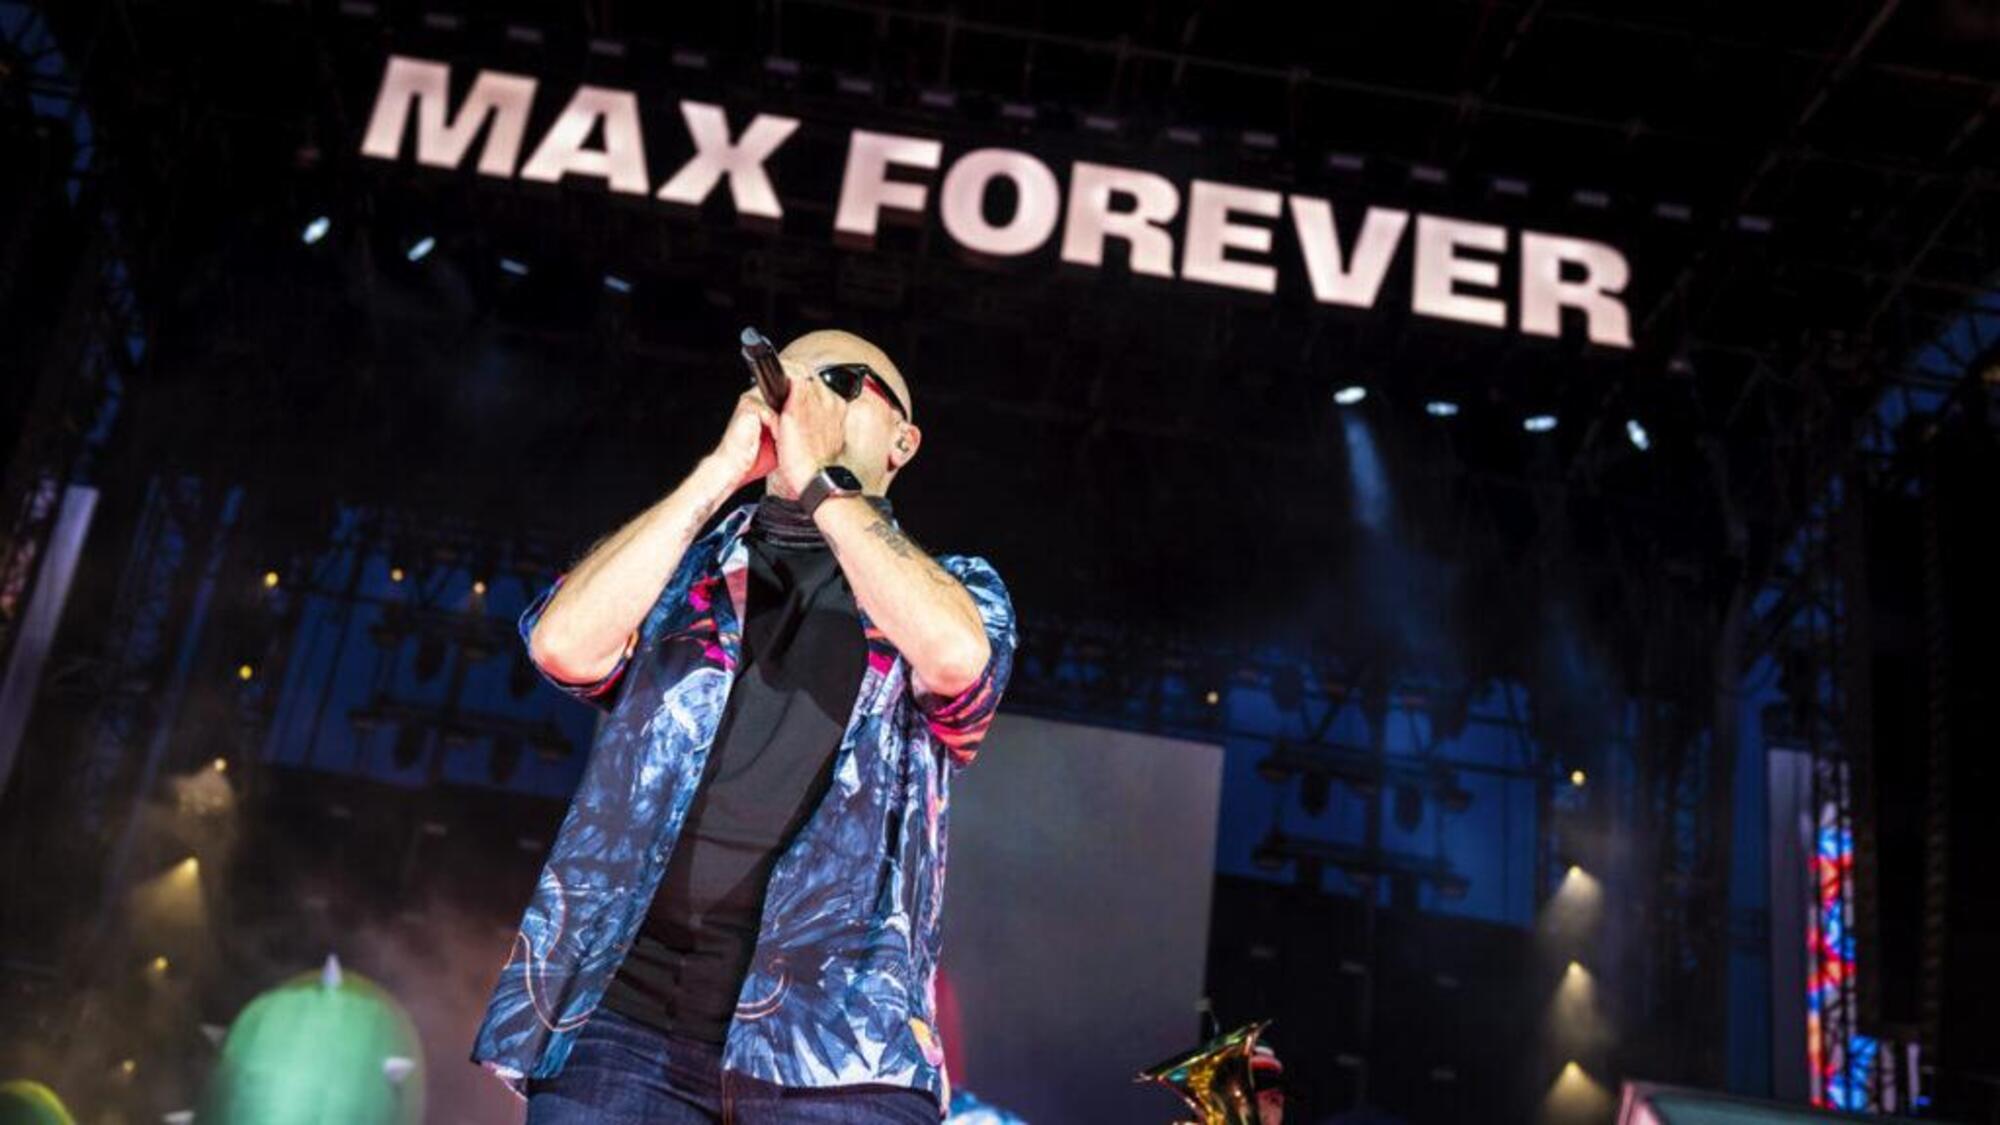 &quot;Max Forever&quot;